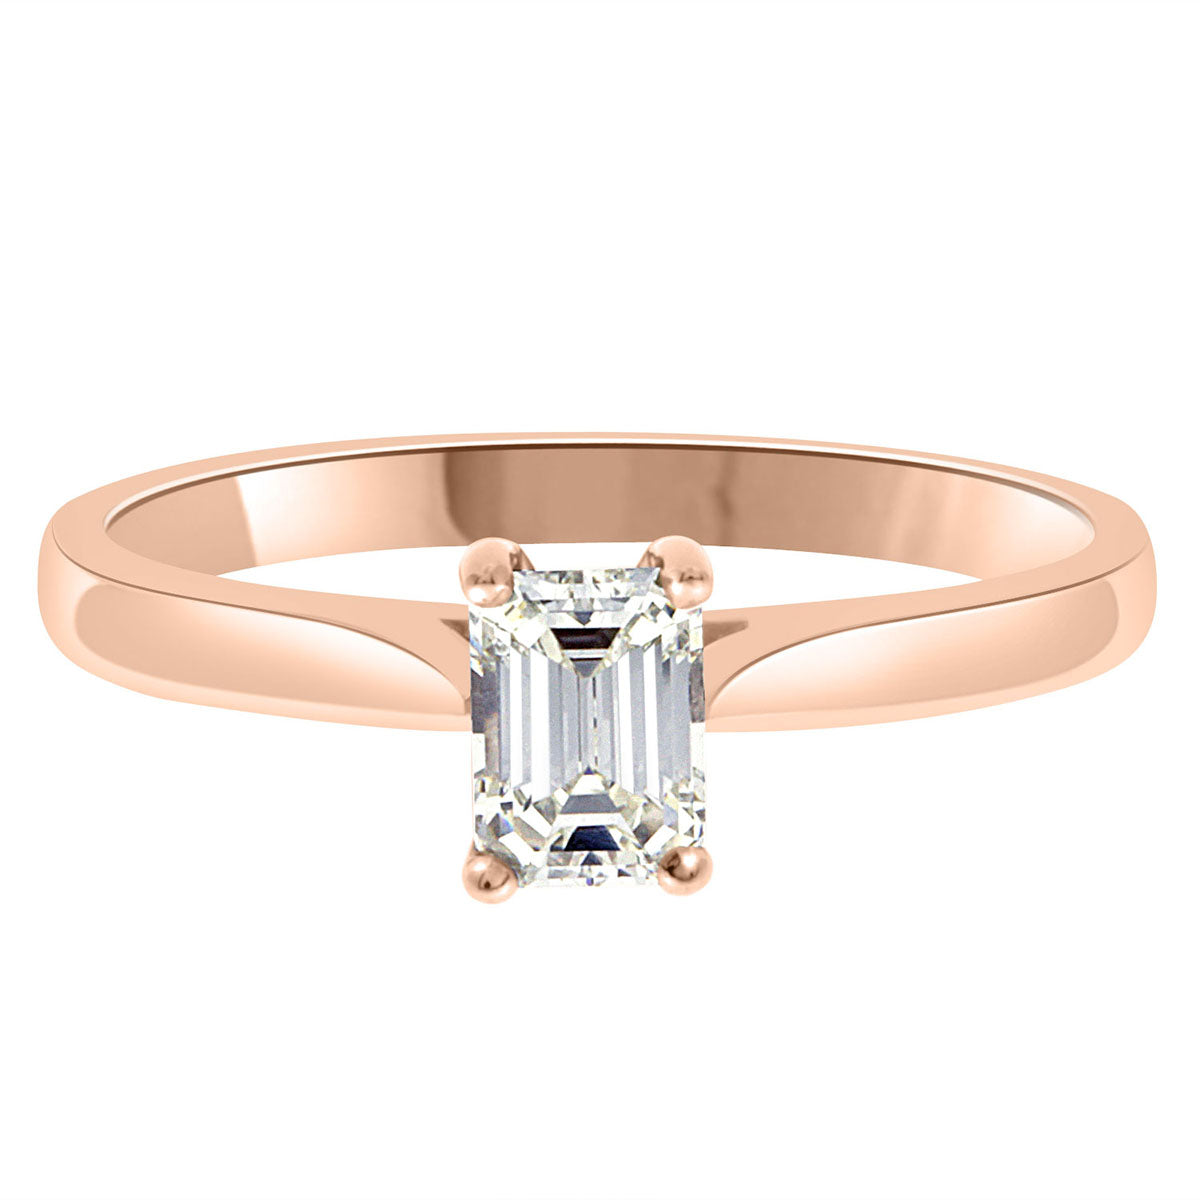 Emerald Cut Ring Solitaire Engagement Ring in rose gold